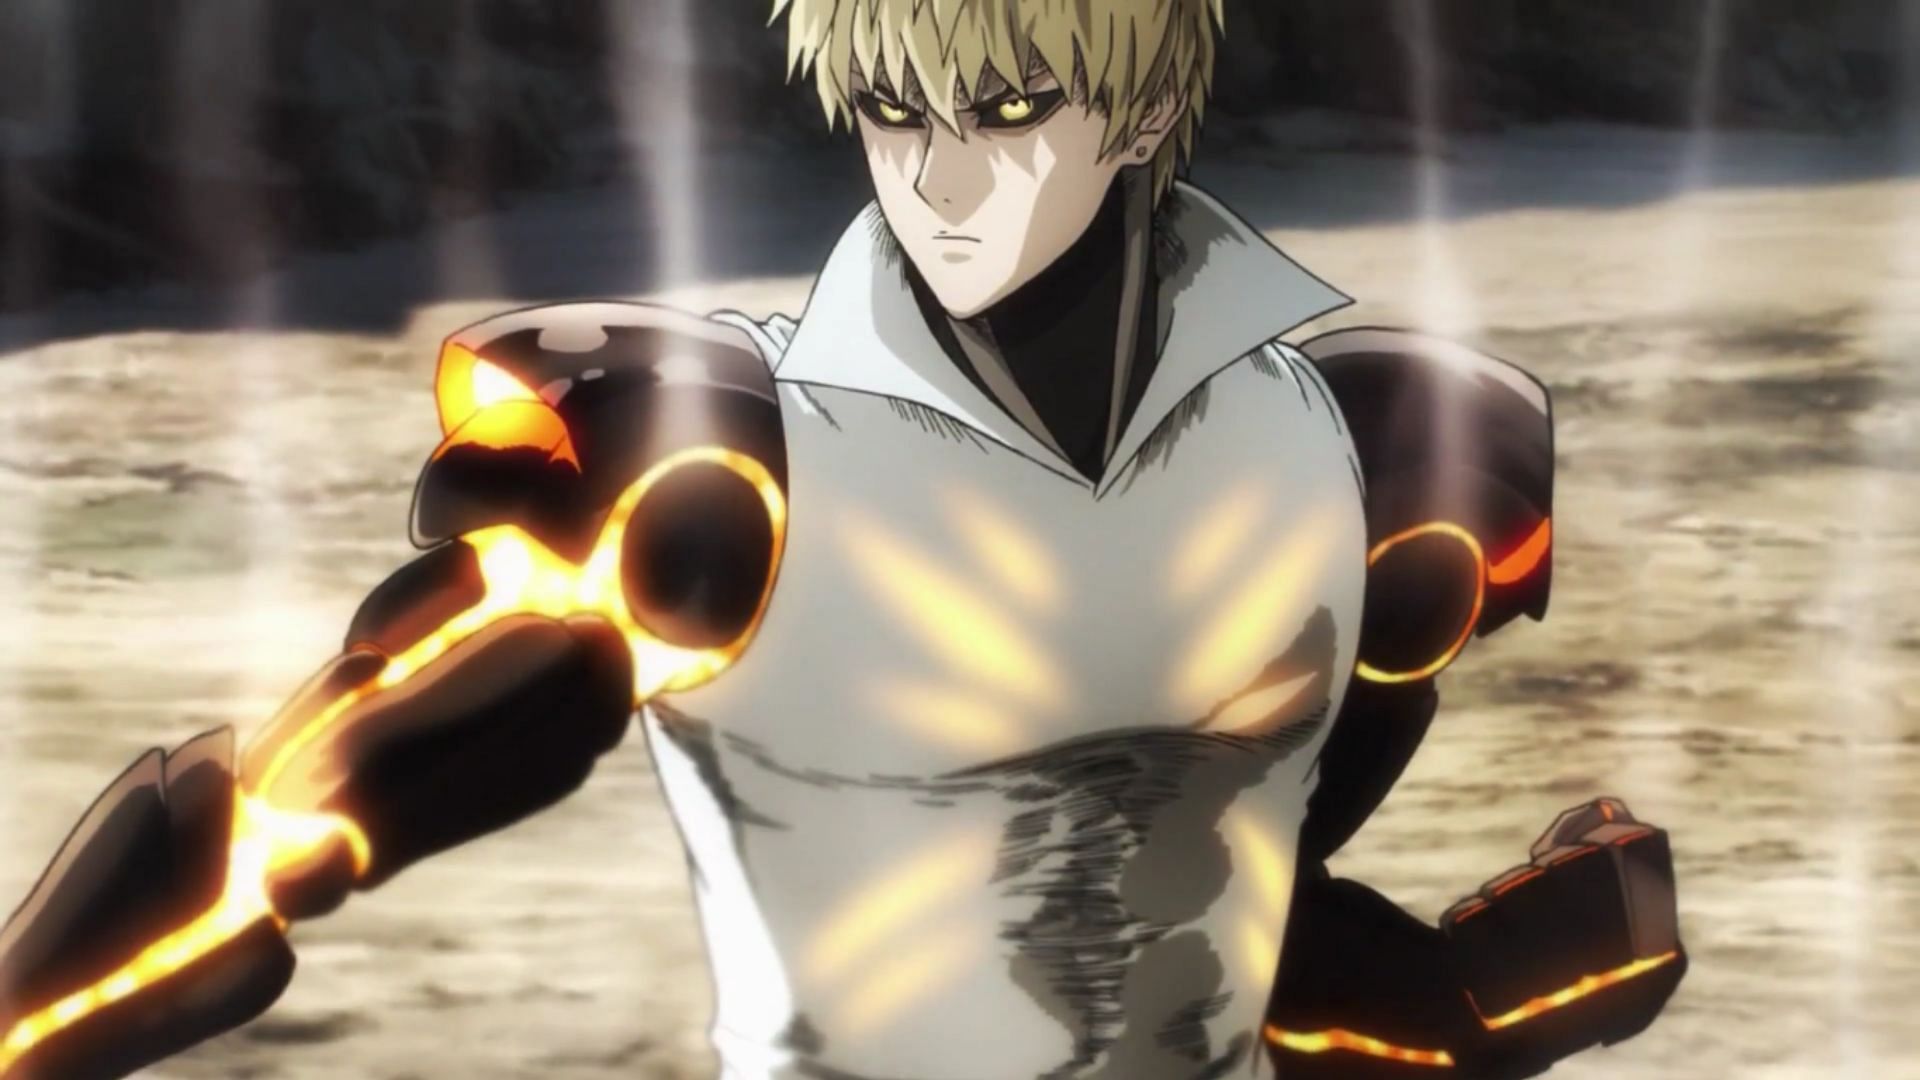 One Punch Man season 3 character visual shows Genos in full glory (Image via Madhouse)